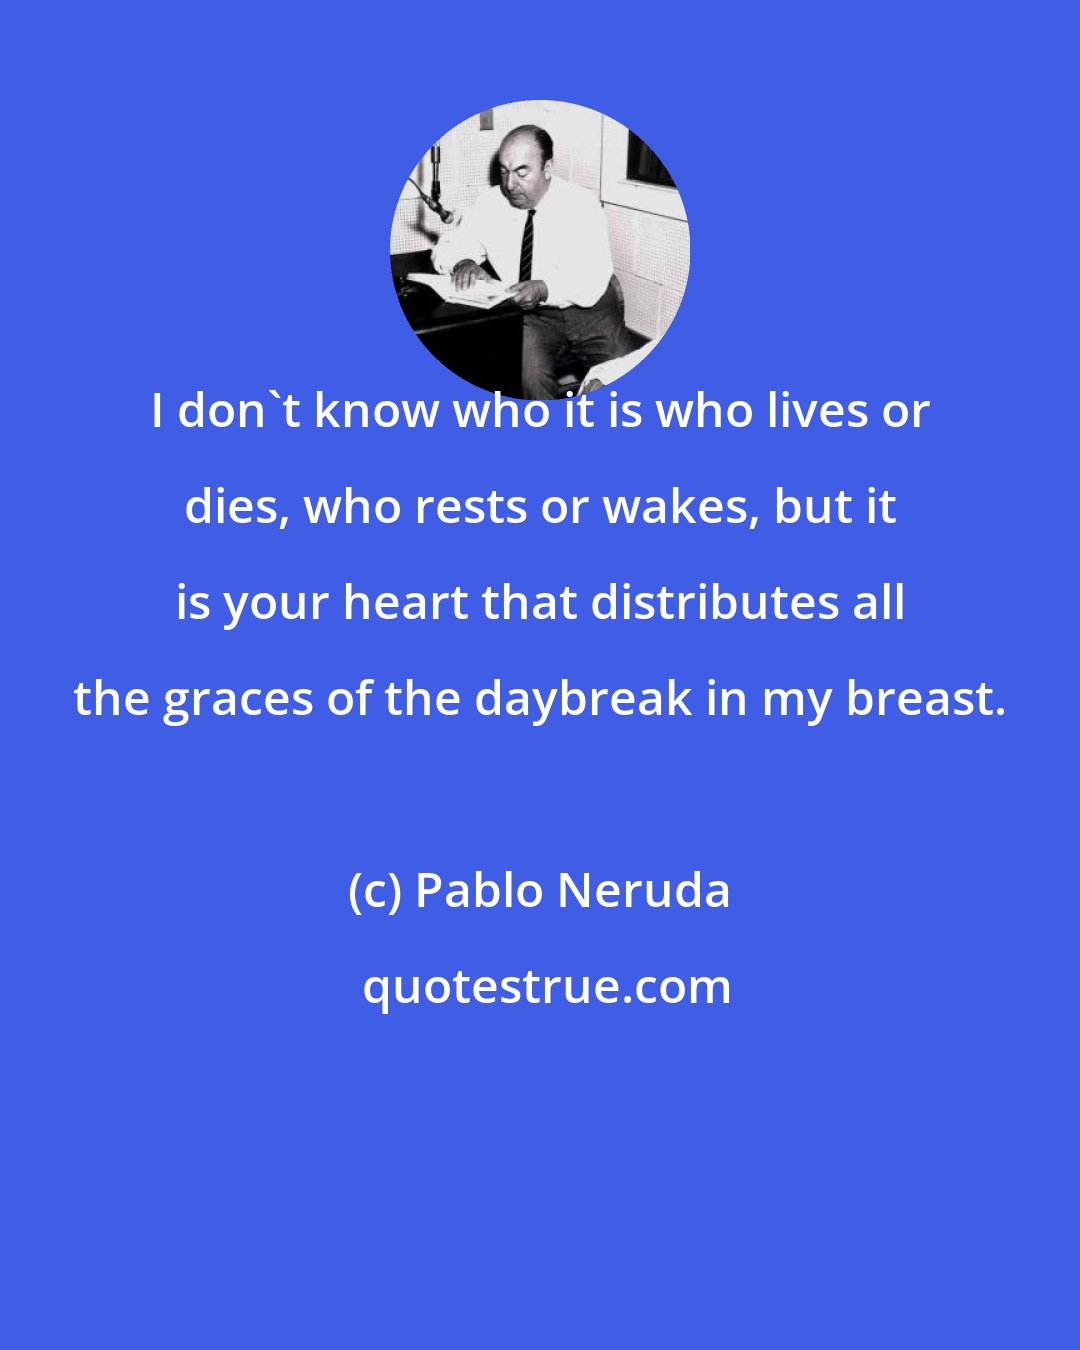 Pablo Neruda: I don't know who it is who lives or dies, who rests or wakes, but it is your heart that distributes all the graces of the daybreak in my breast.